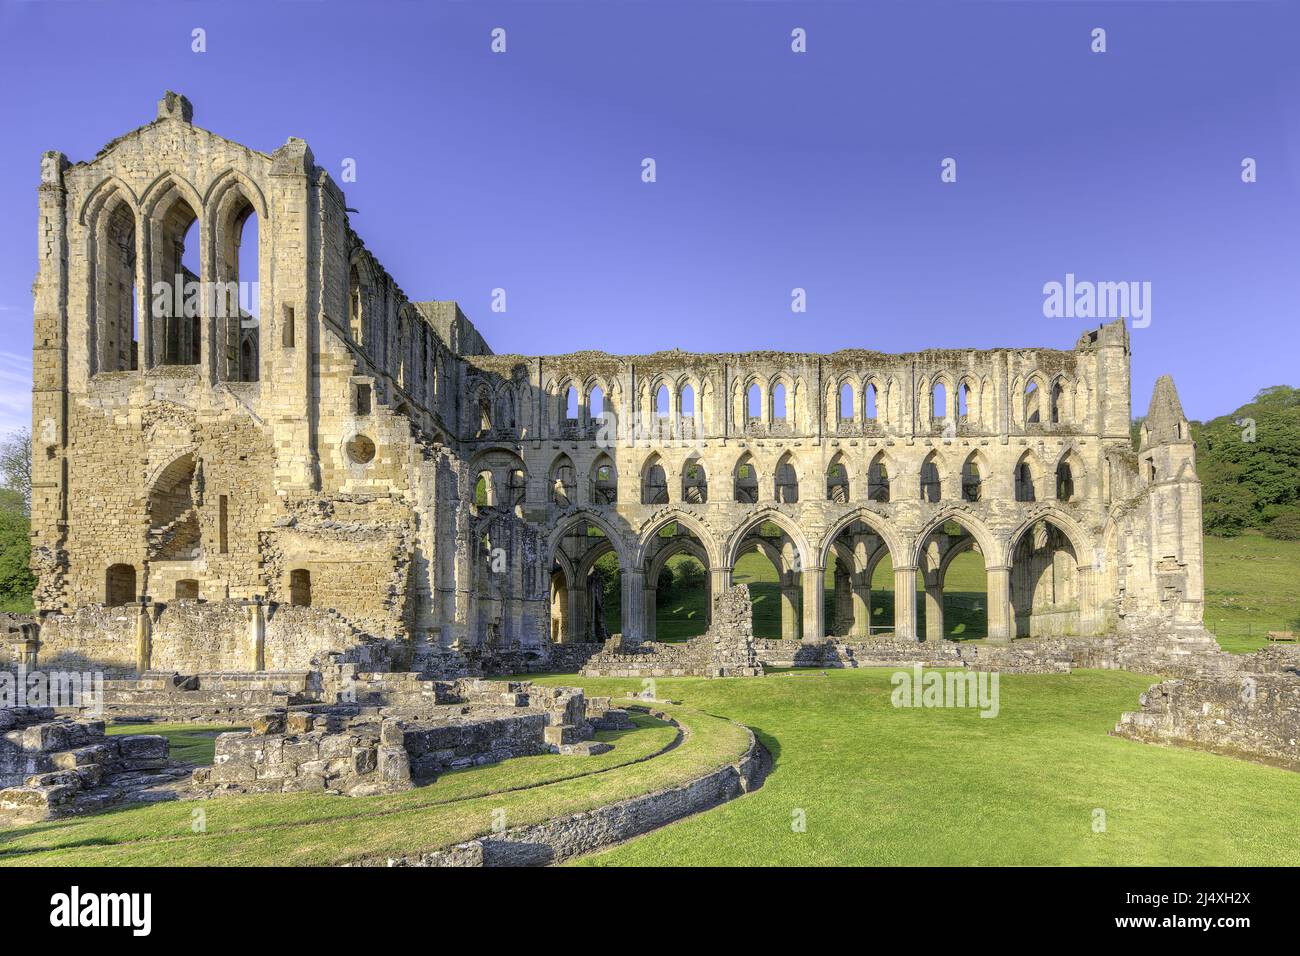 Presbytery & South Transept with Chapter House ruin (L foreground)  of ruined Rievaulx Cistercian Abbey founded 1132 - suppressed 1538. Stock Photo